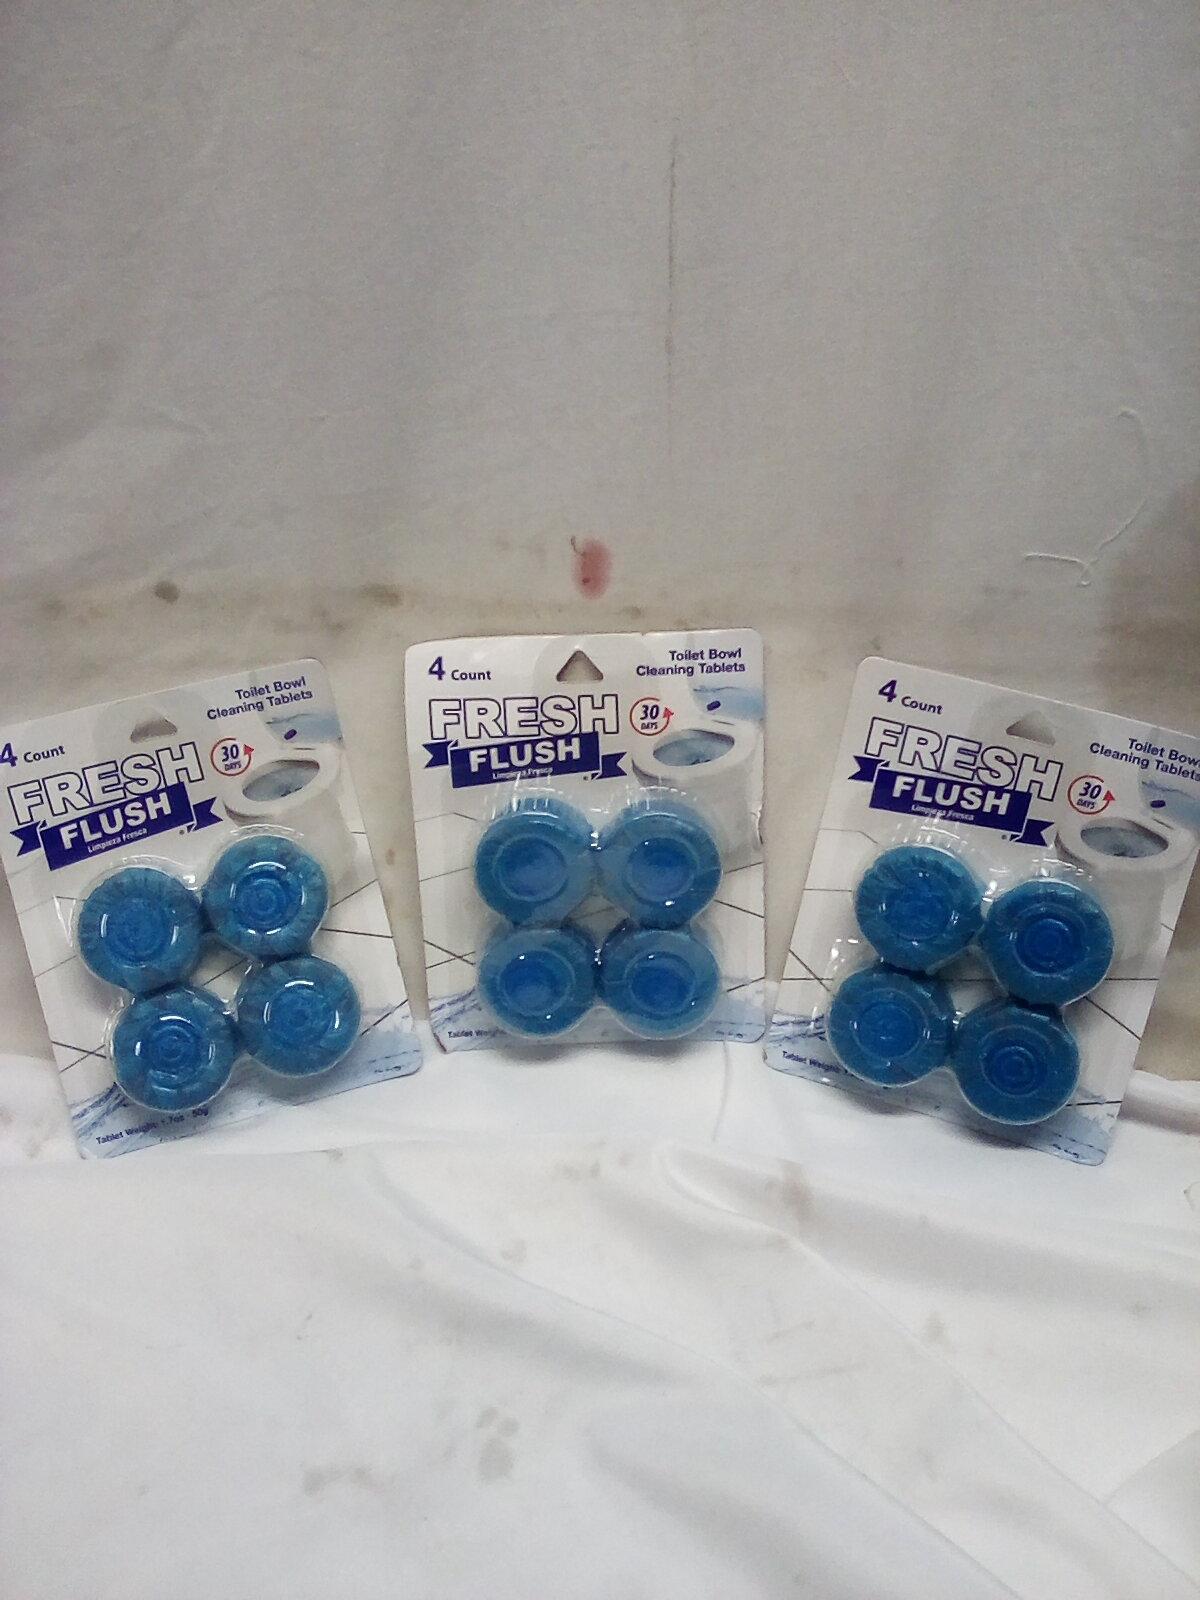 Fresh Flush Toilet Bowl Cleaning Tablets. Qty 3- 4 Count Packs.